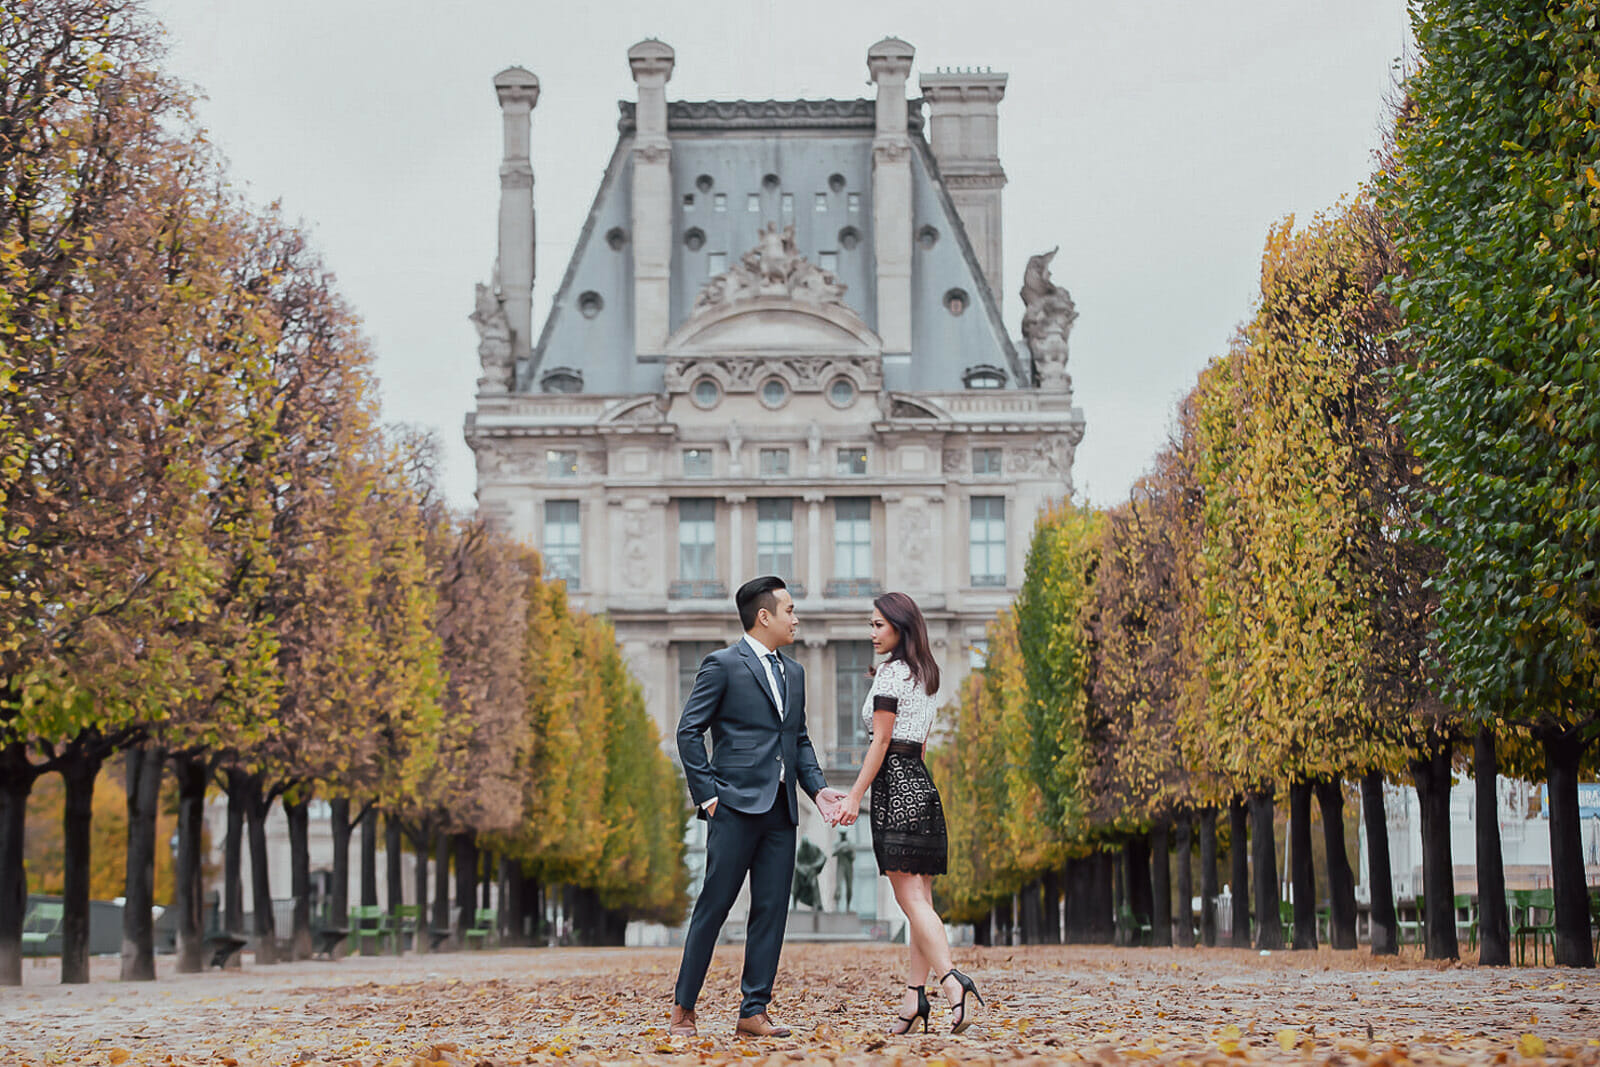 Beautiful couple photography in the Tuileries Garden with the Louvre as backdrop